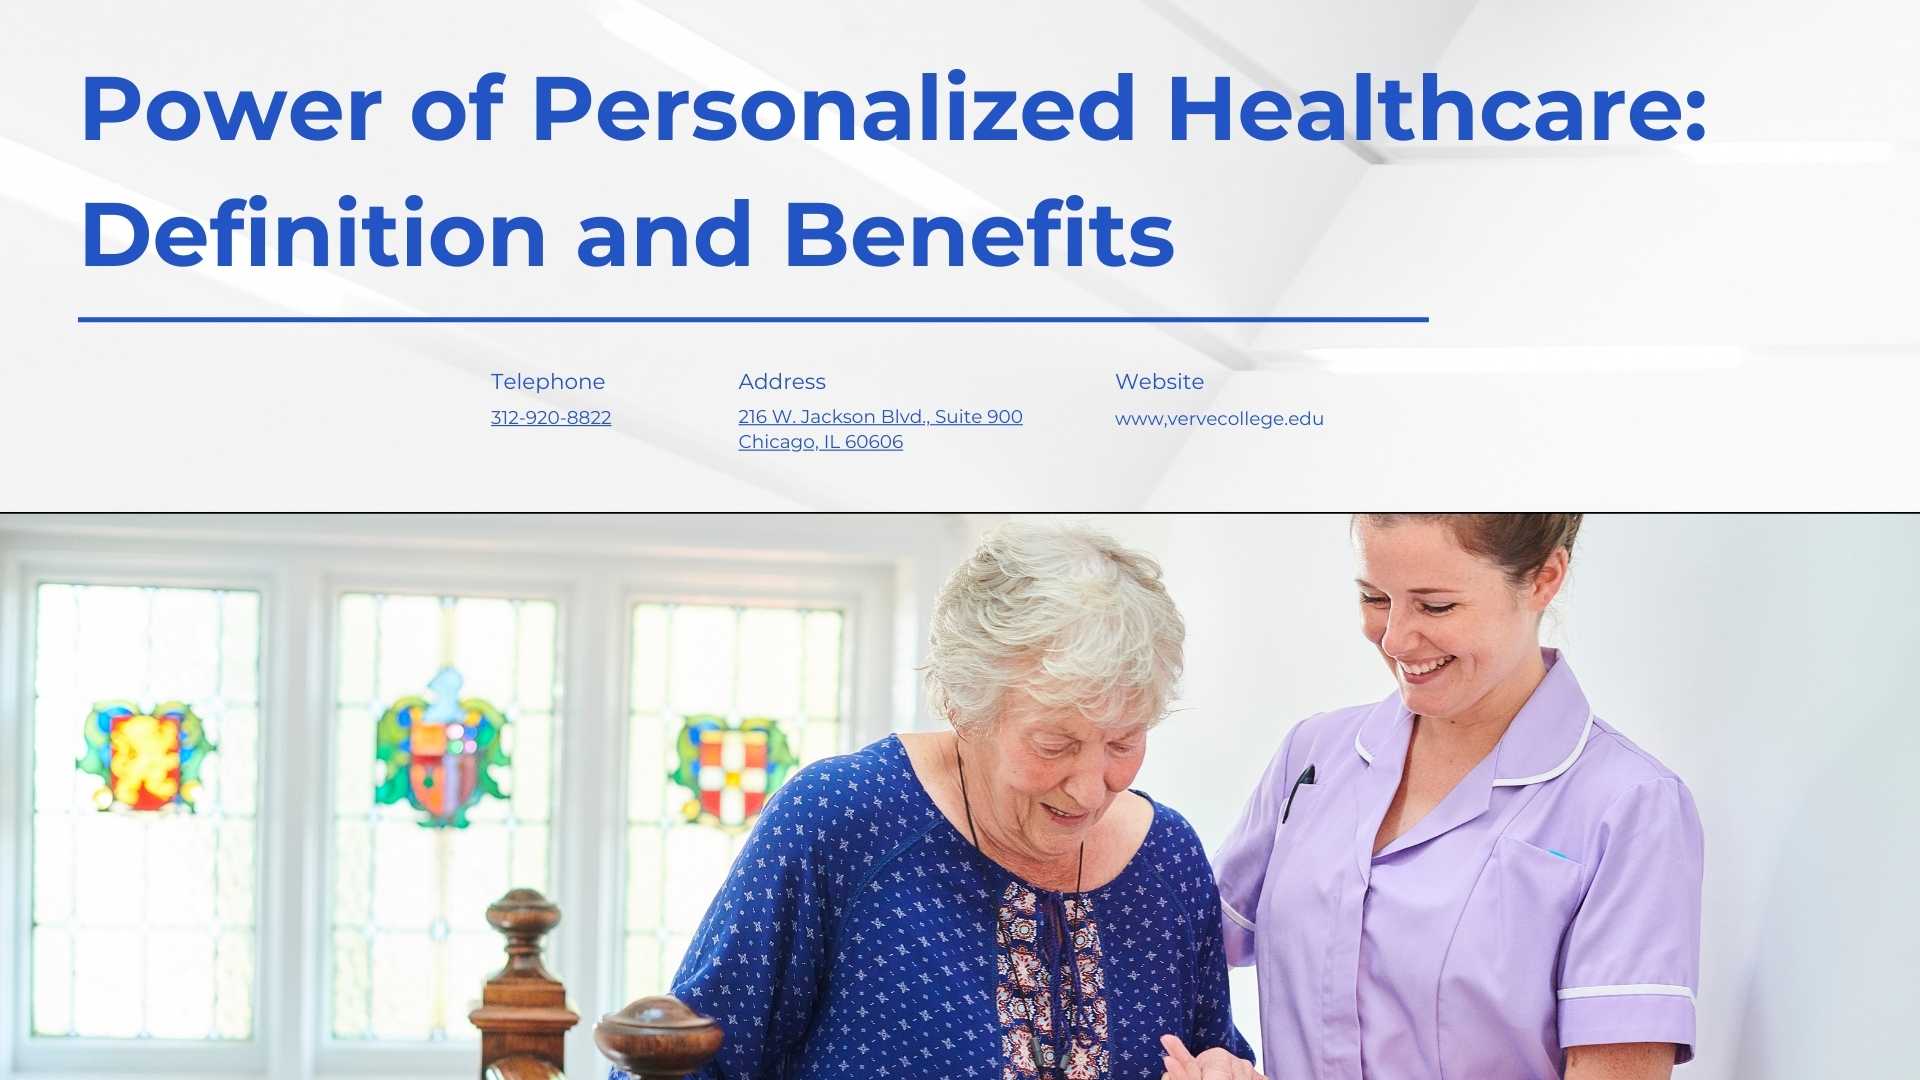 Power of Personalized Healthcare: Definition and Benefits